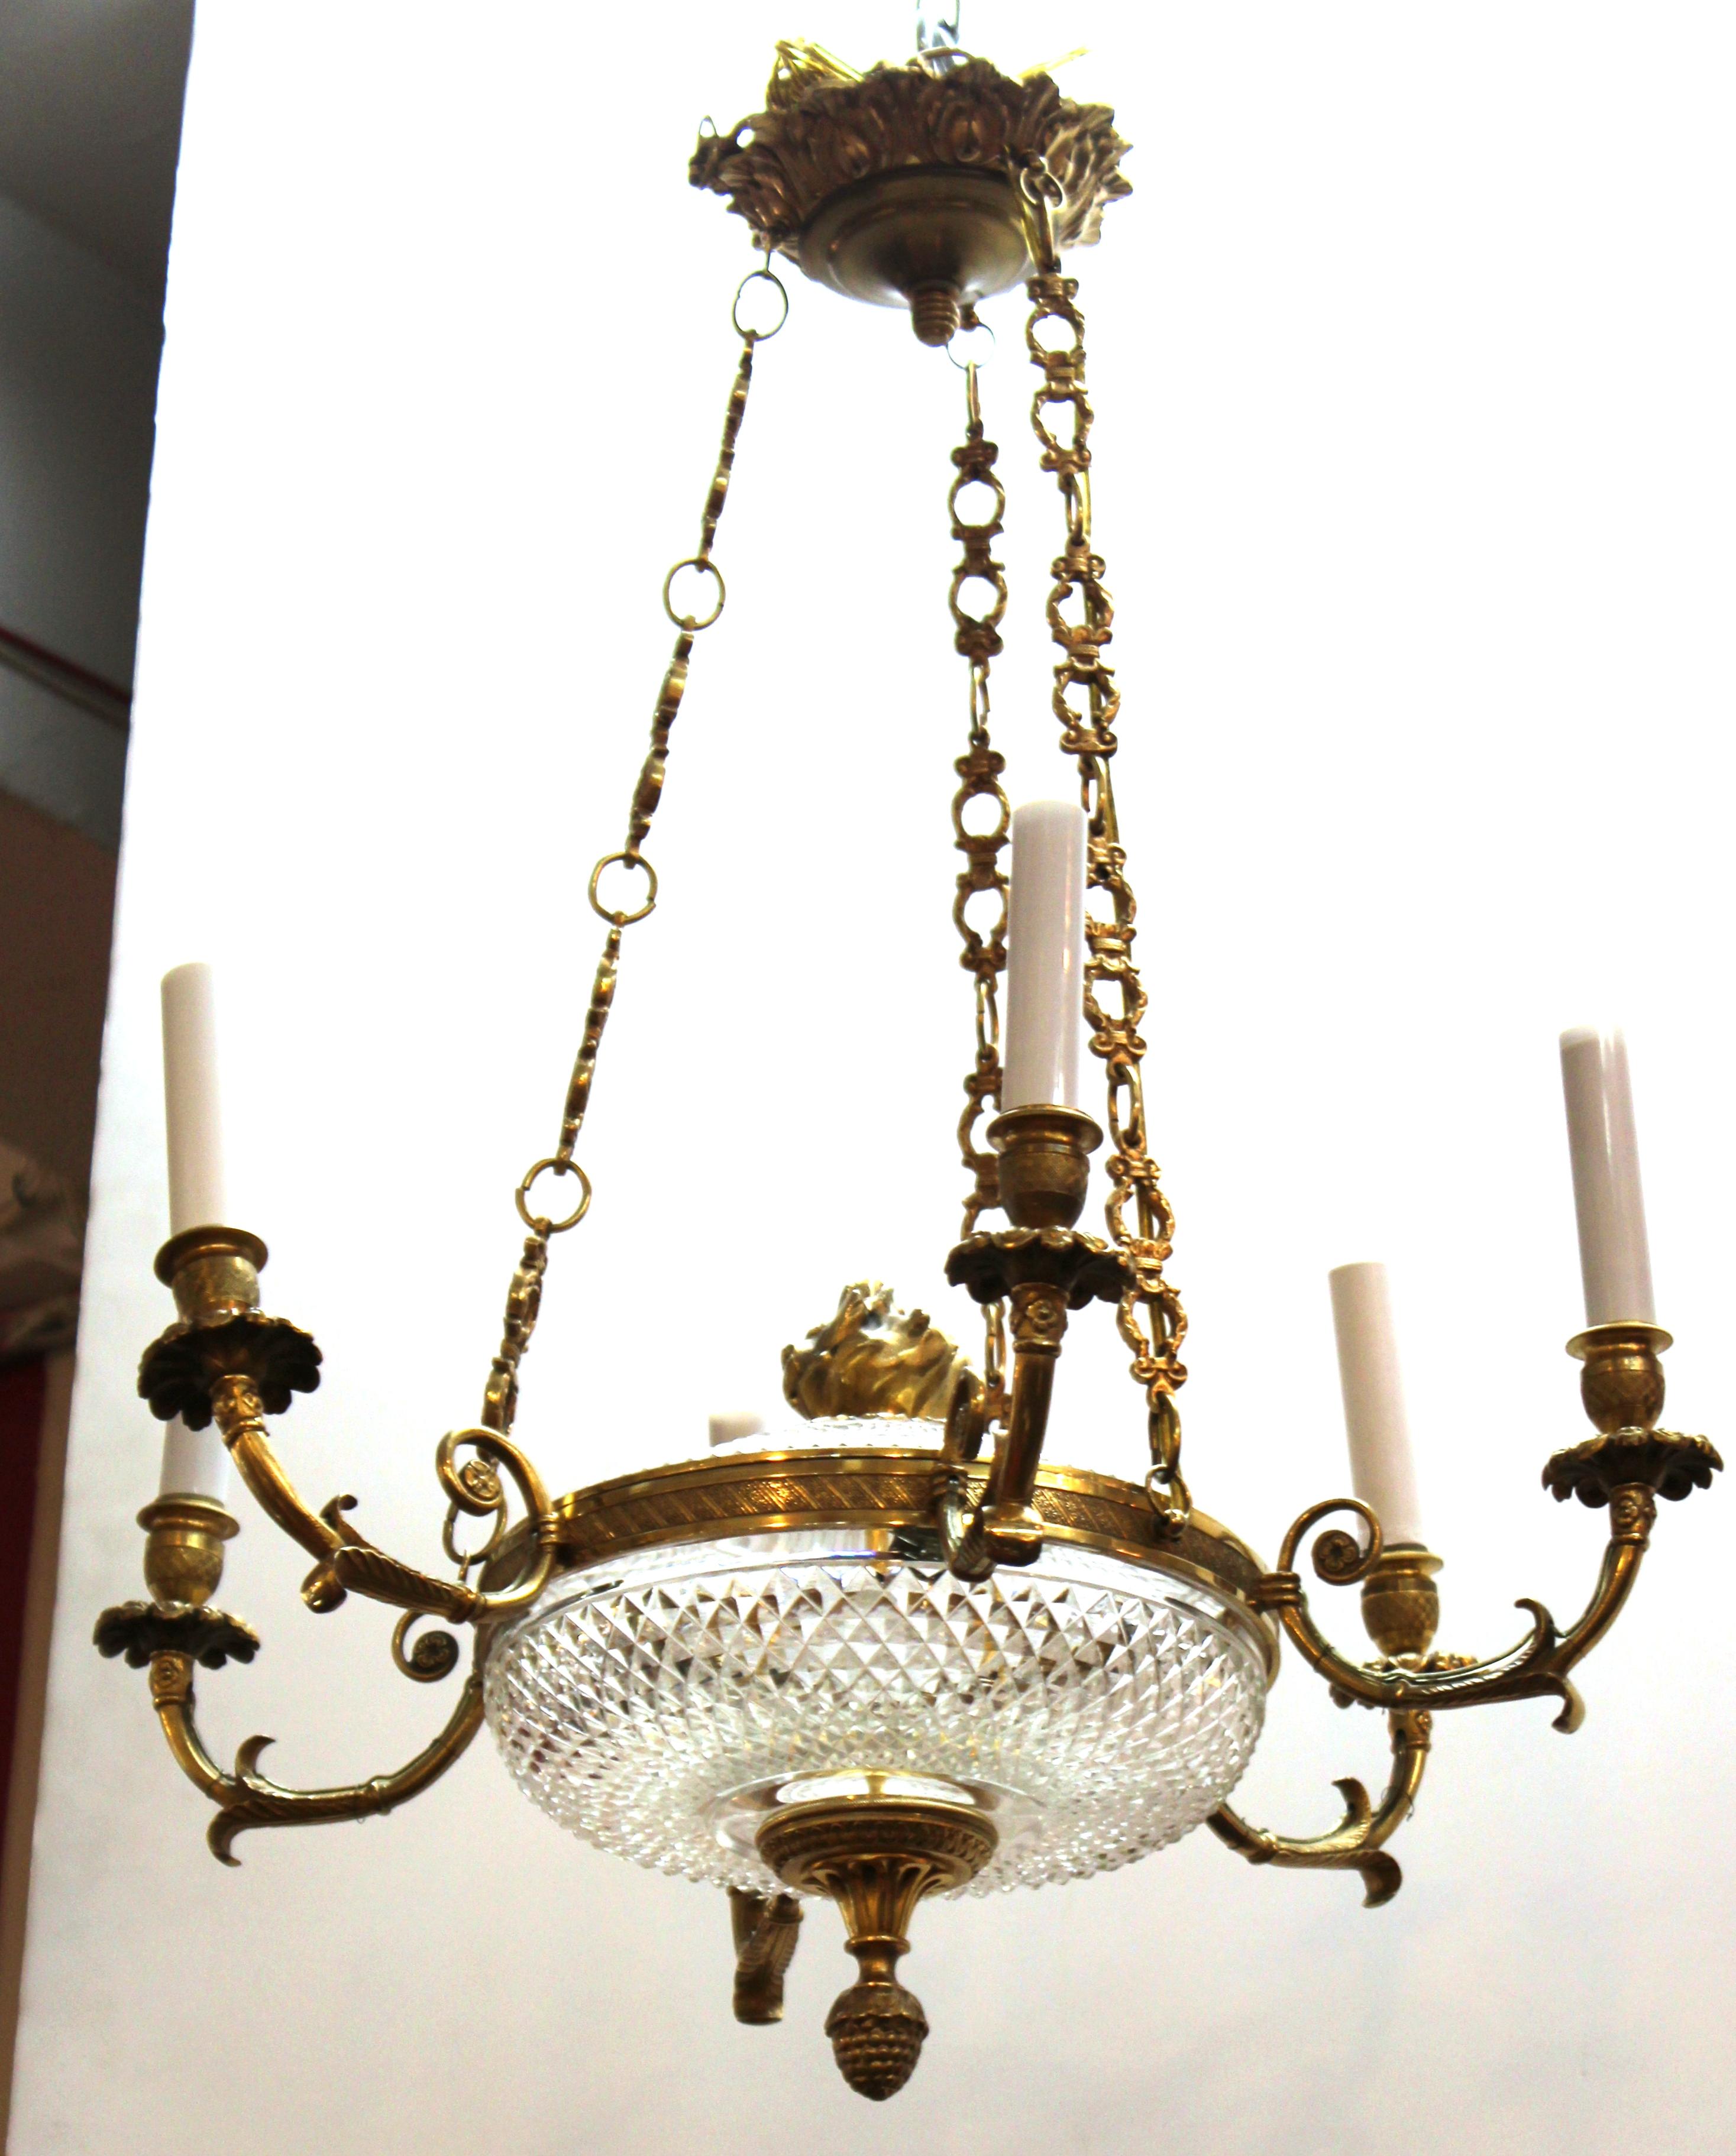 French Empire revival style chandelier pendant with six arms and crystal inserts. The piece has been rewired and is in great vintage condition with age-appropriate wear.